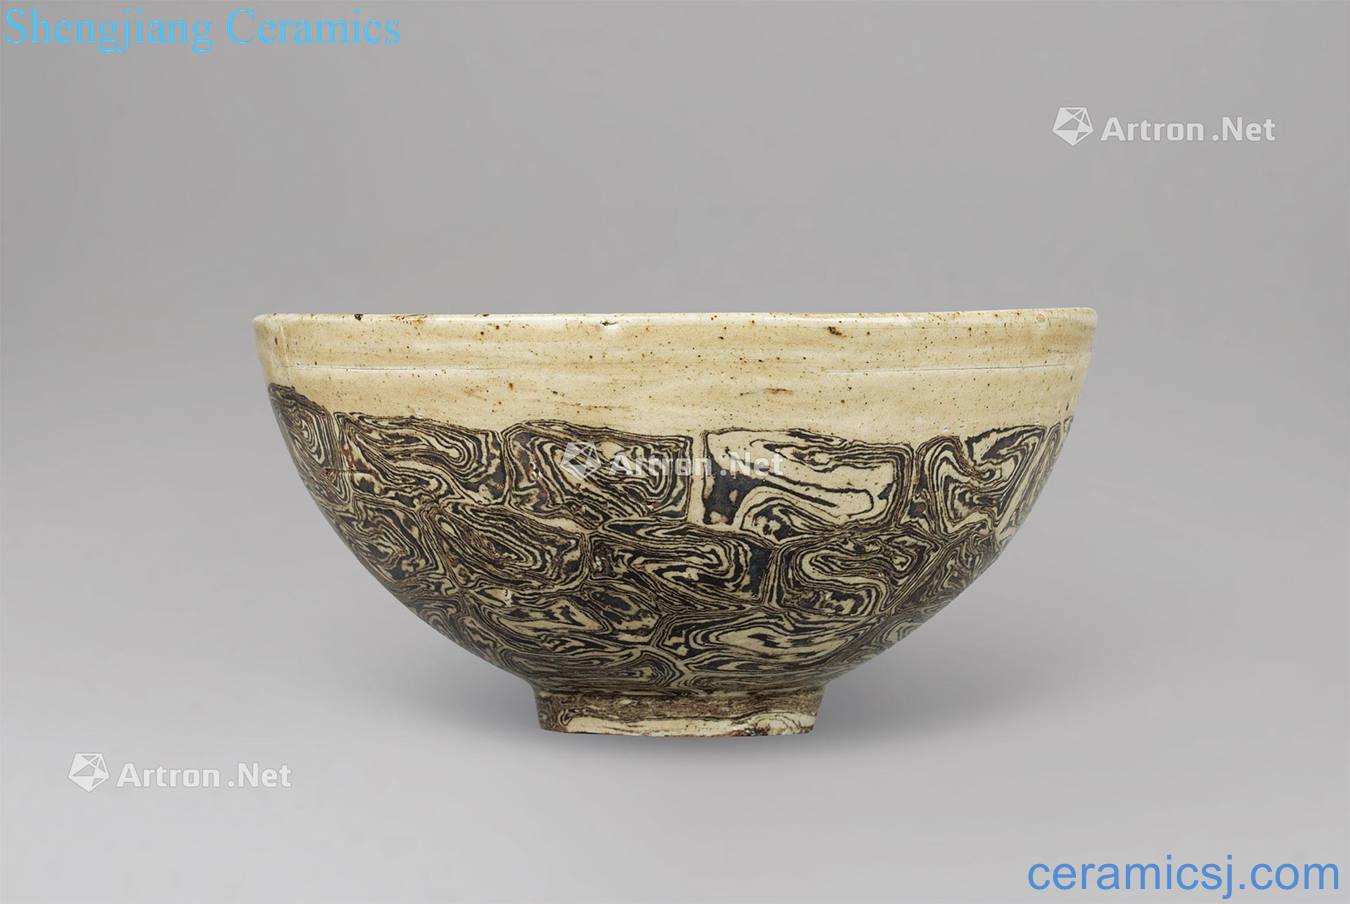 The song dynasty magnetic state kiln twisted placenta bowl